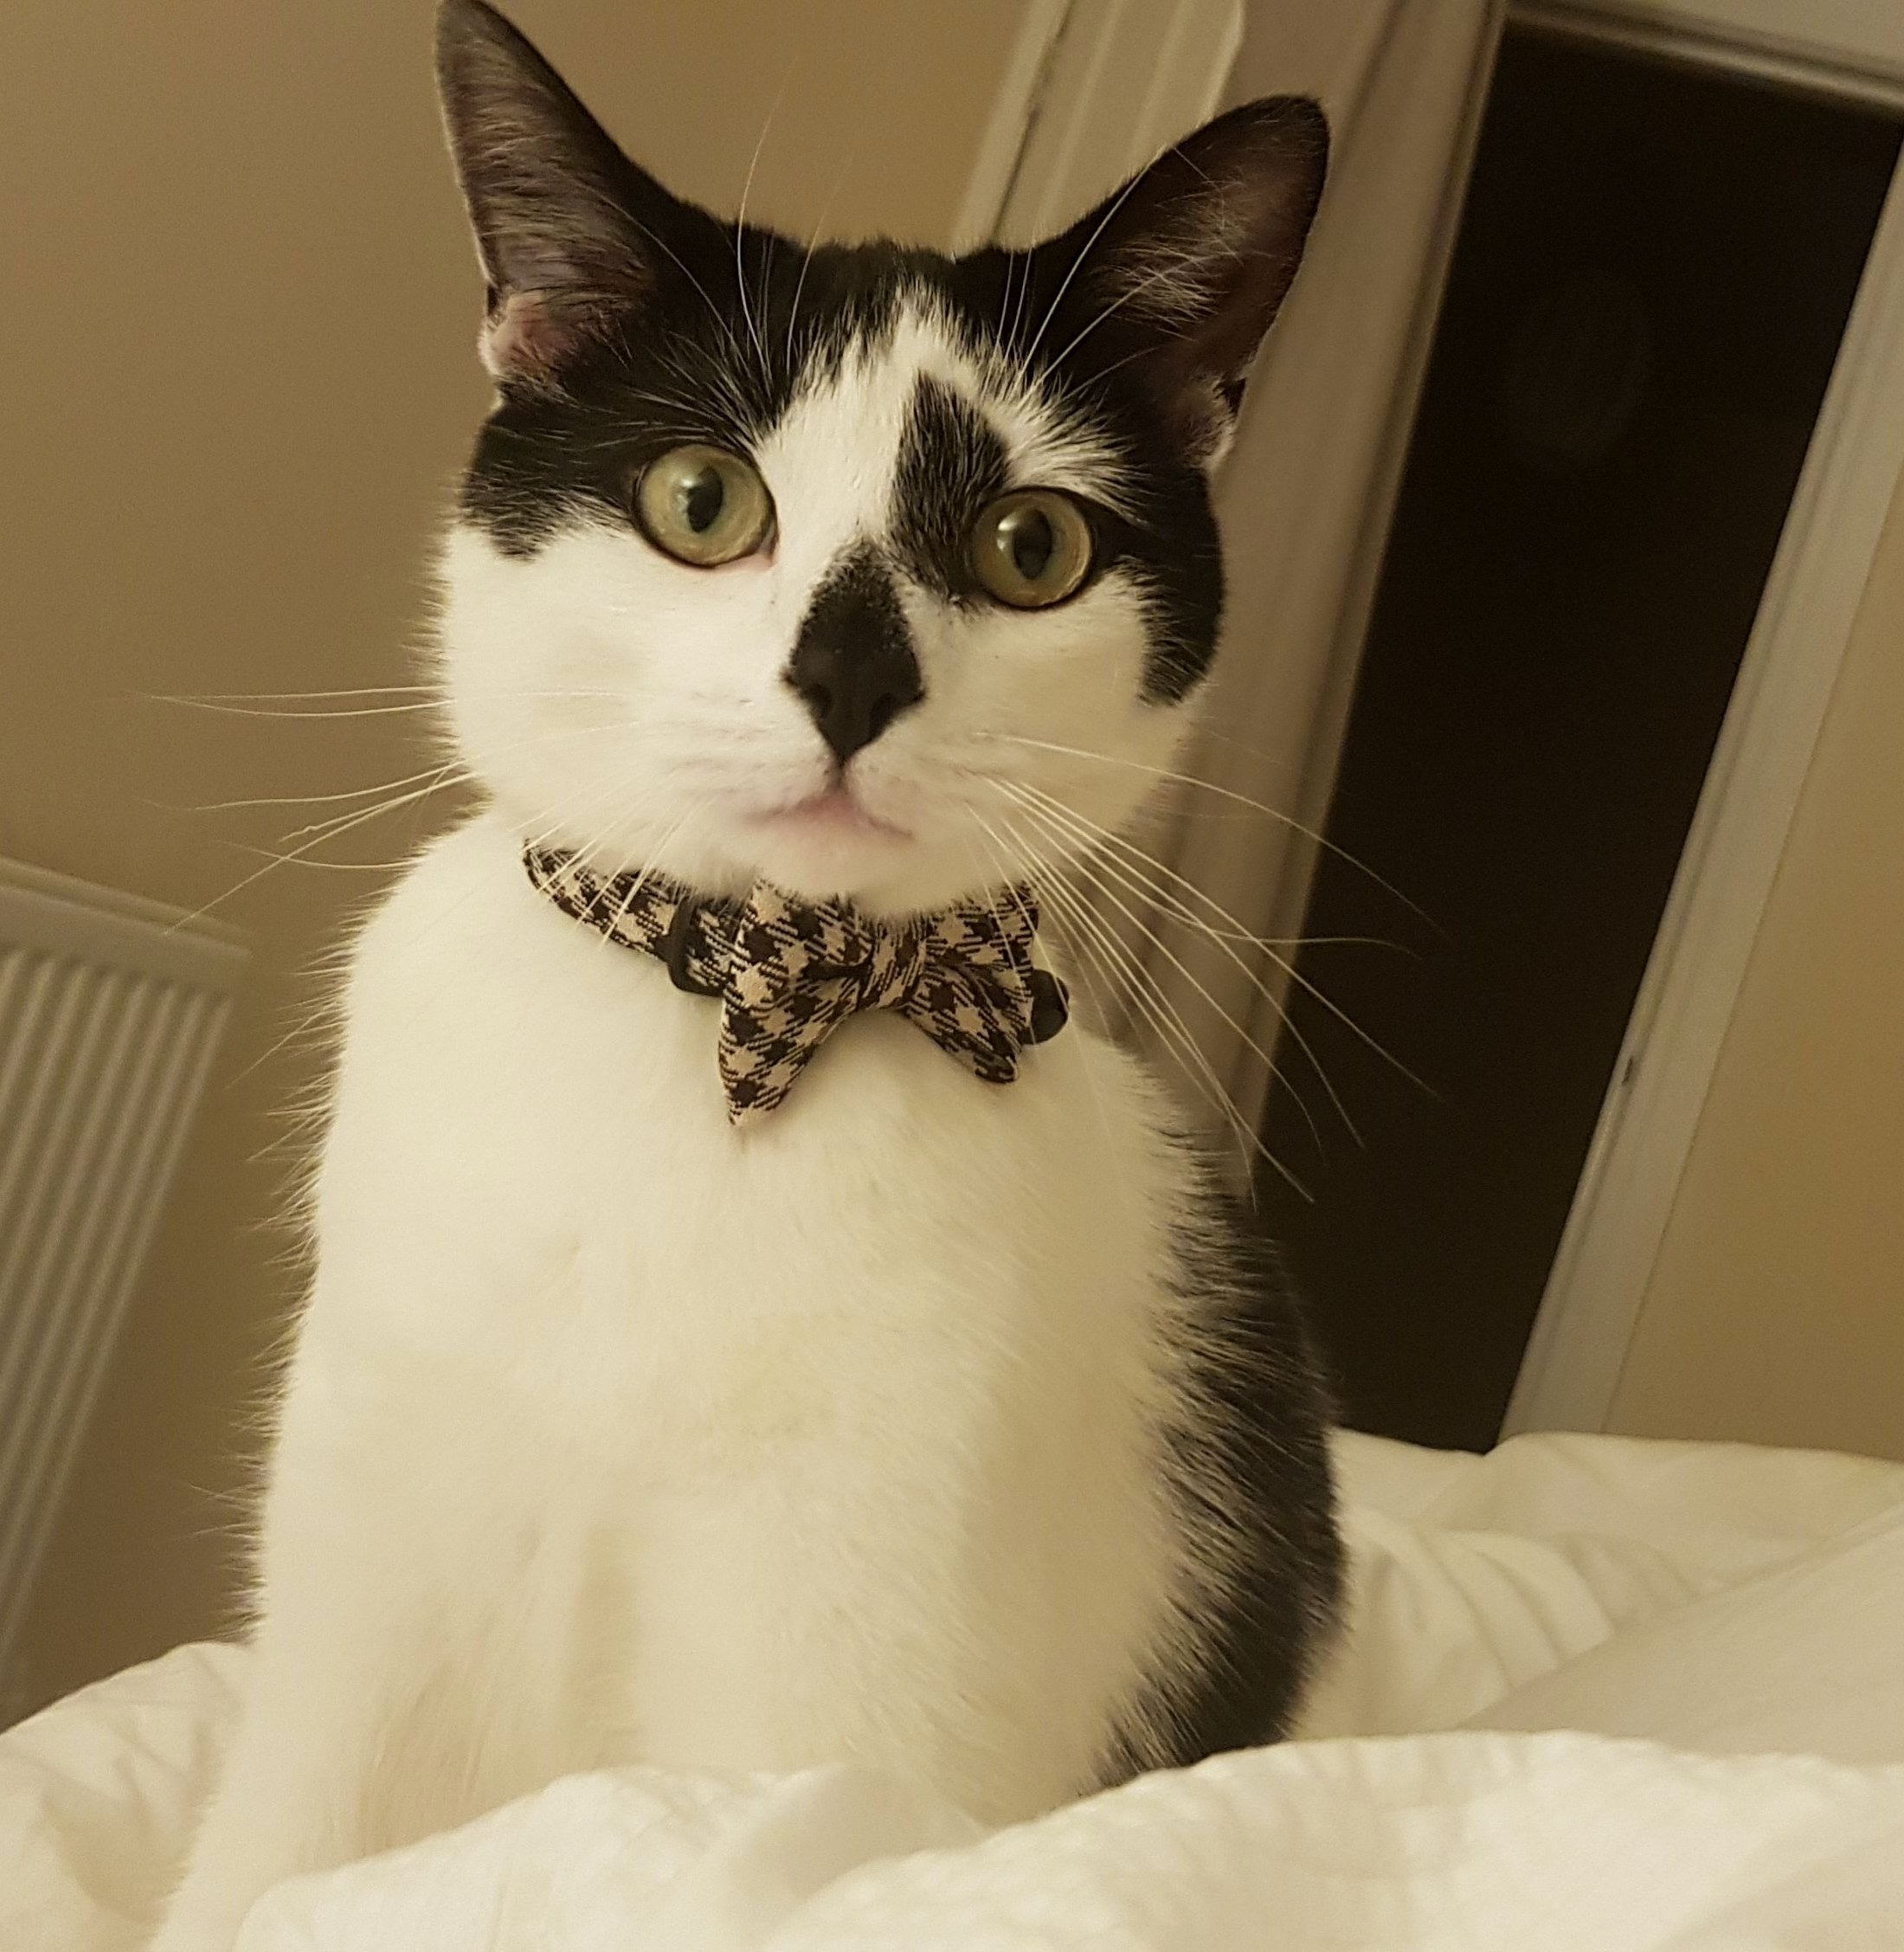 Ernest showing off his new bow tie after he lost the first one.